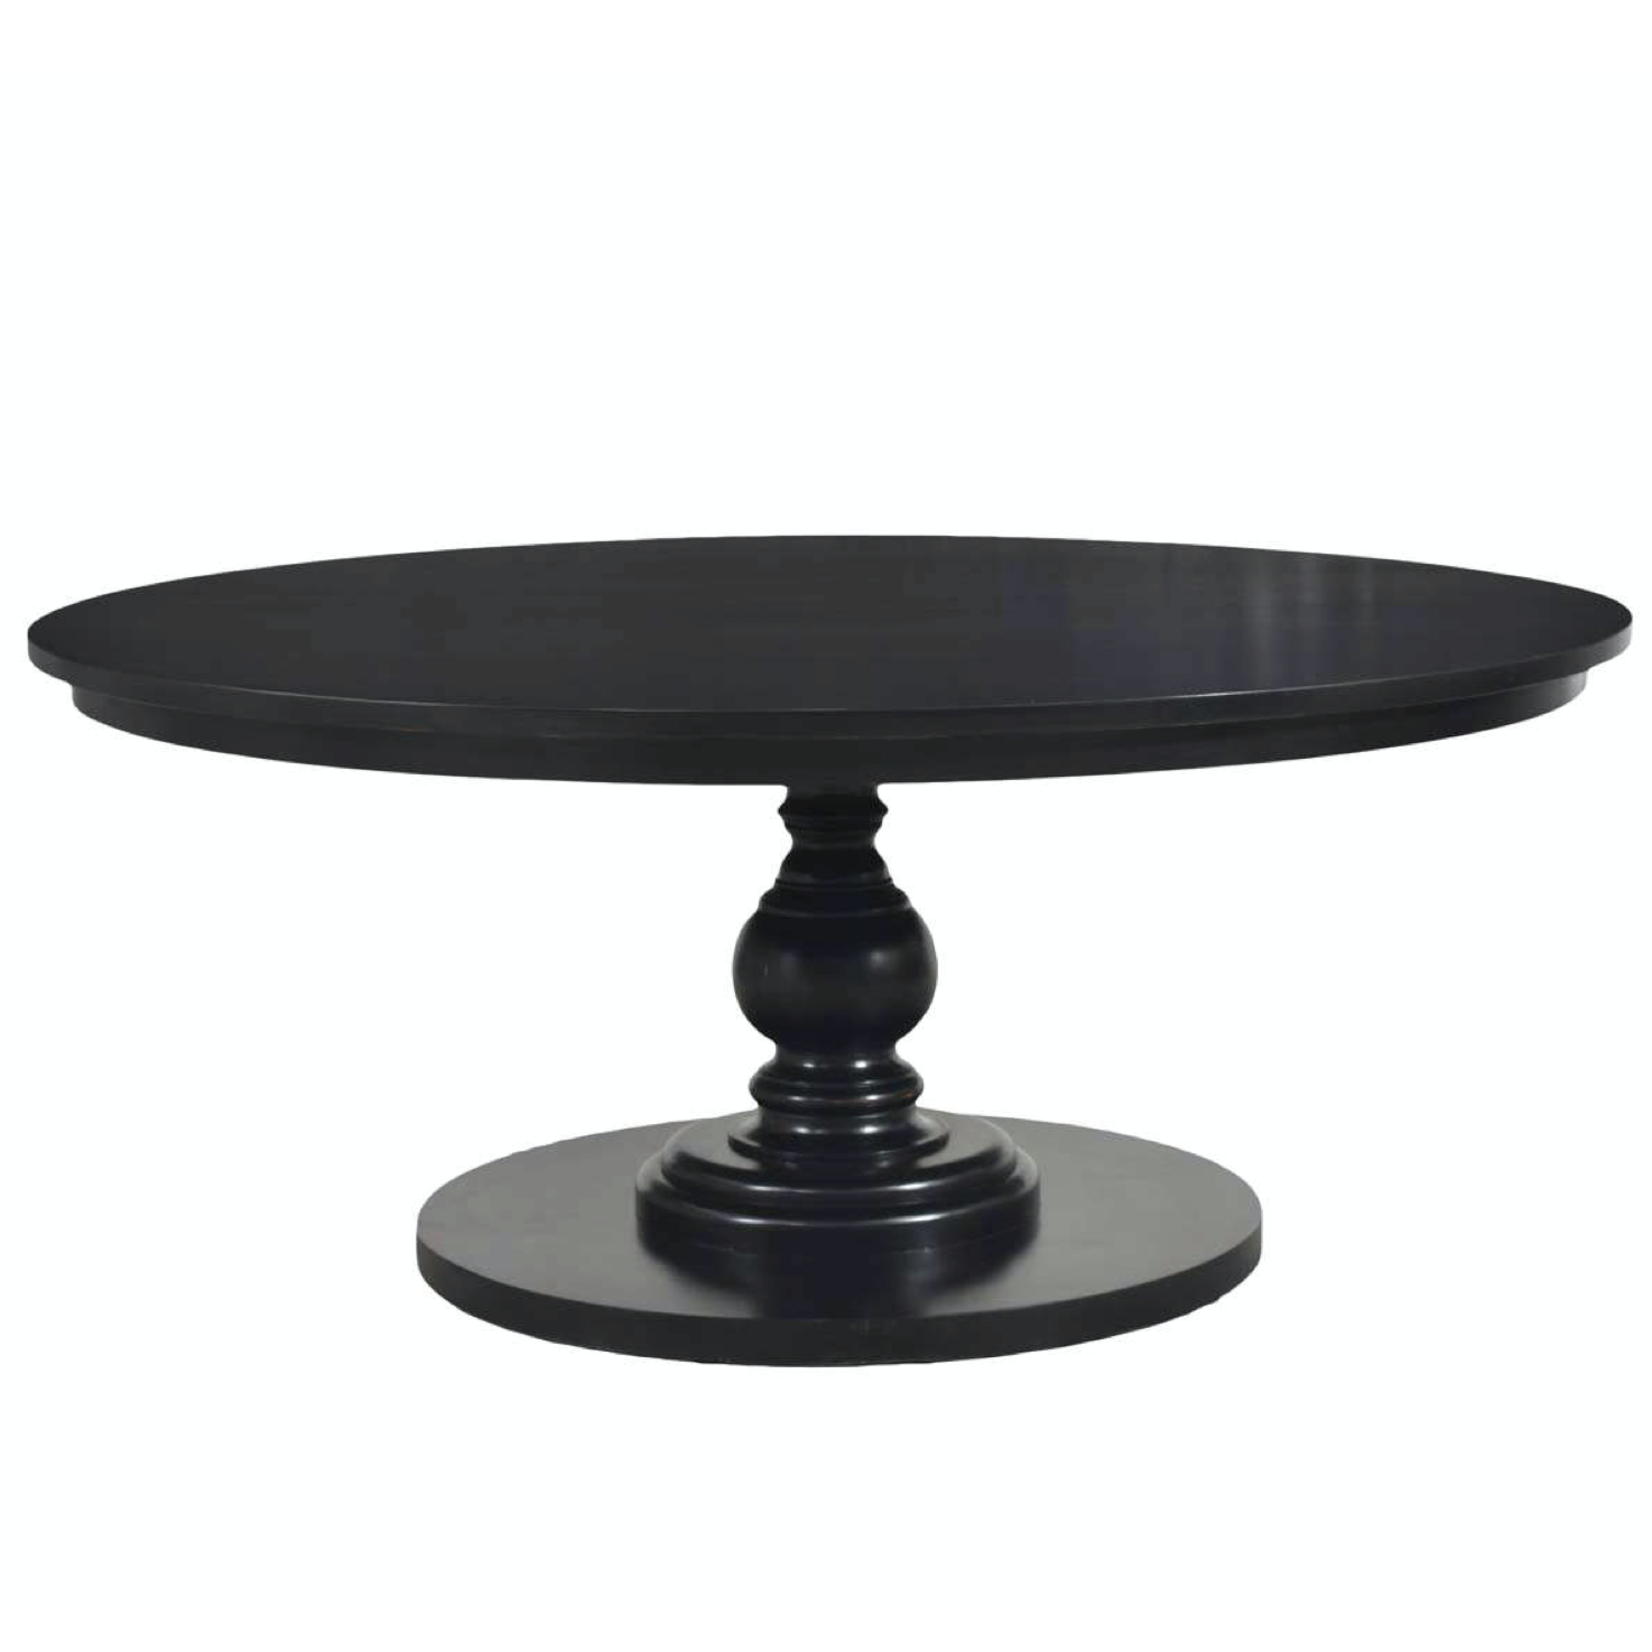 72" Goucho Mahogany Round Trestle Dining Table In Black Harvest